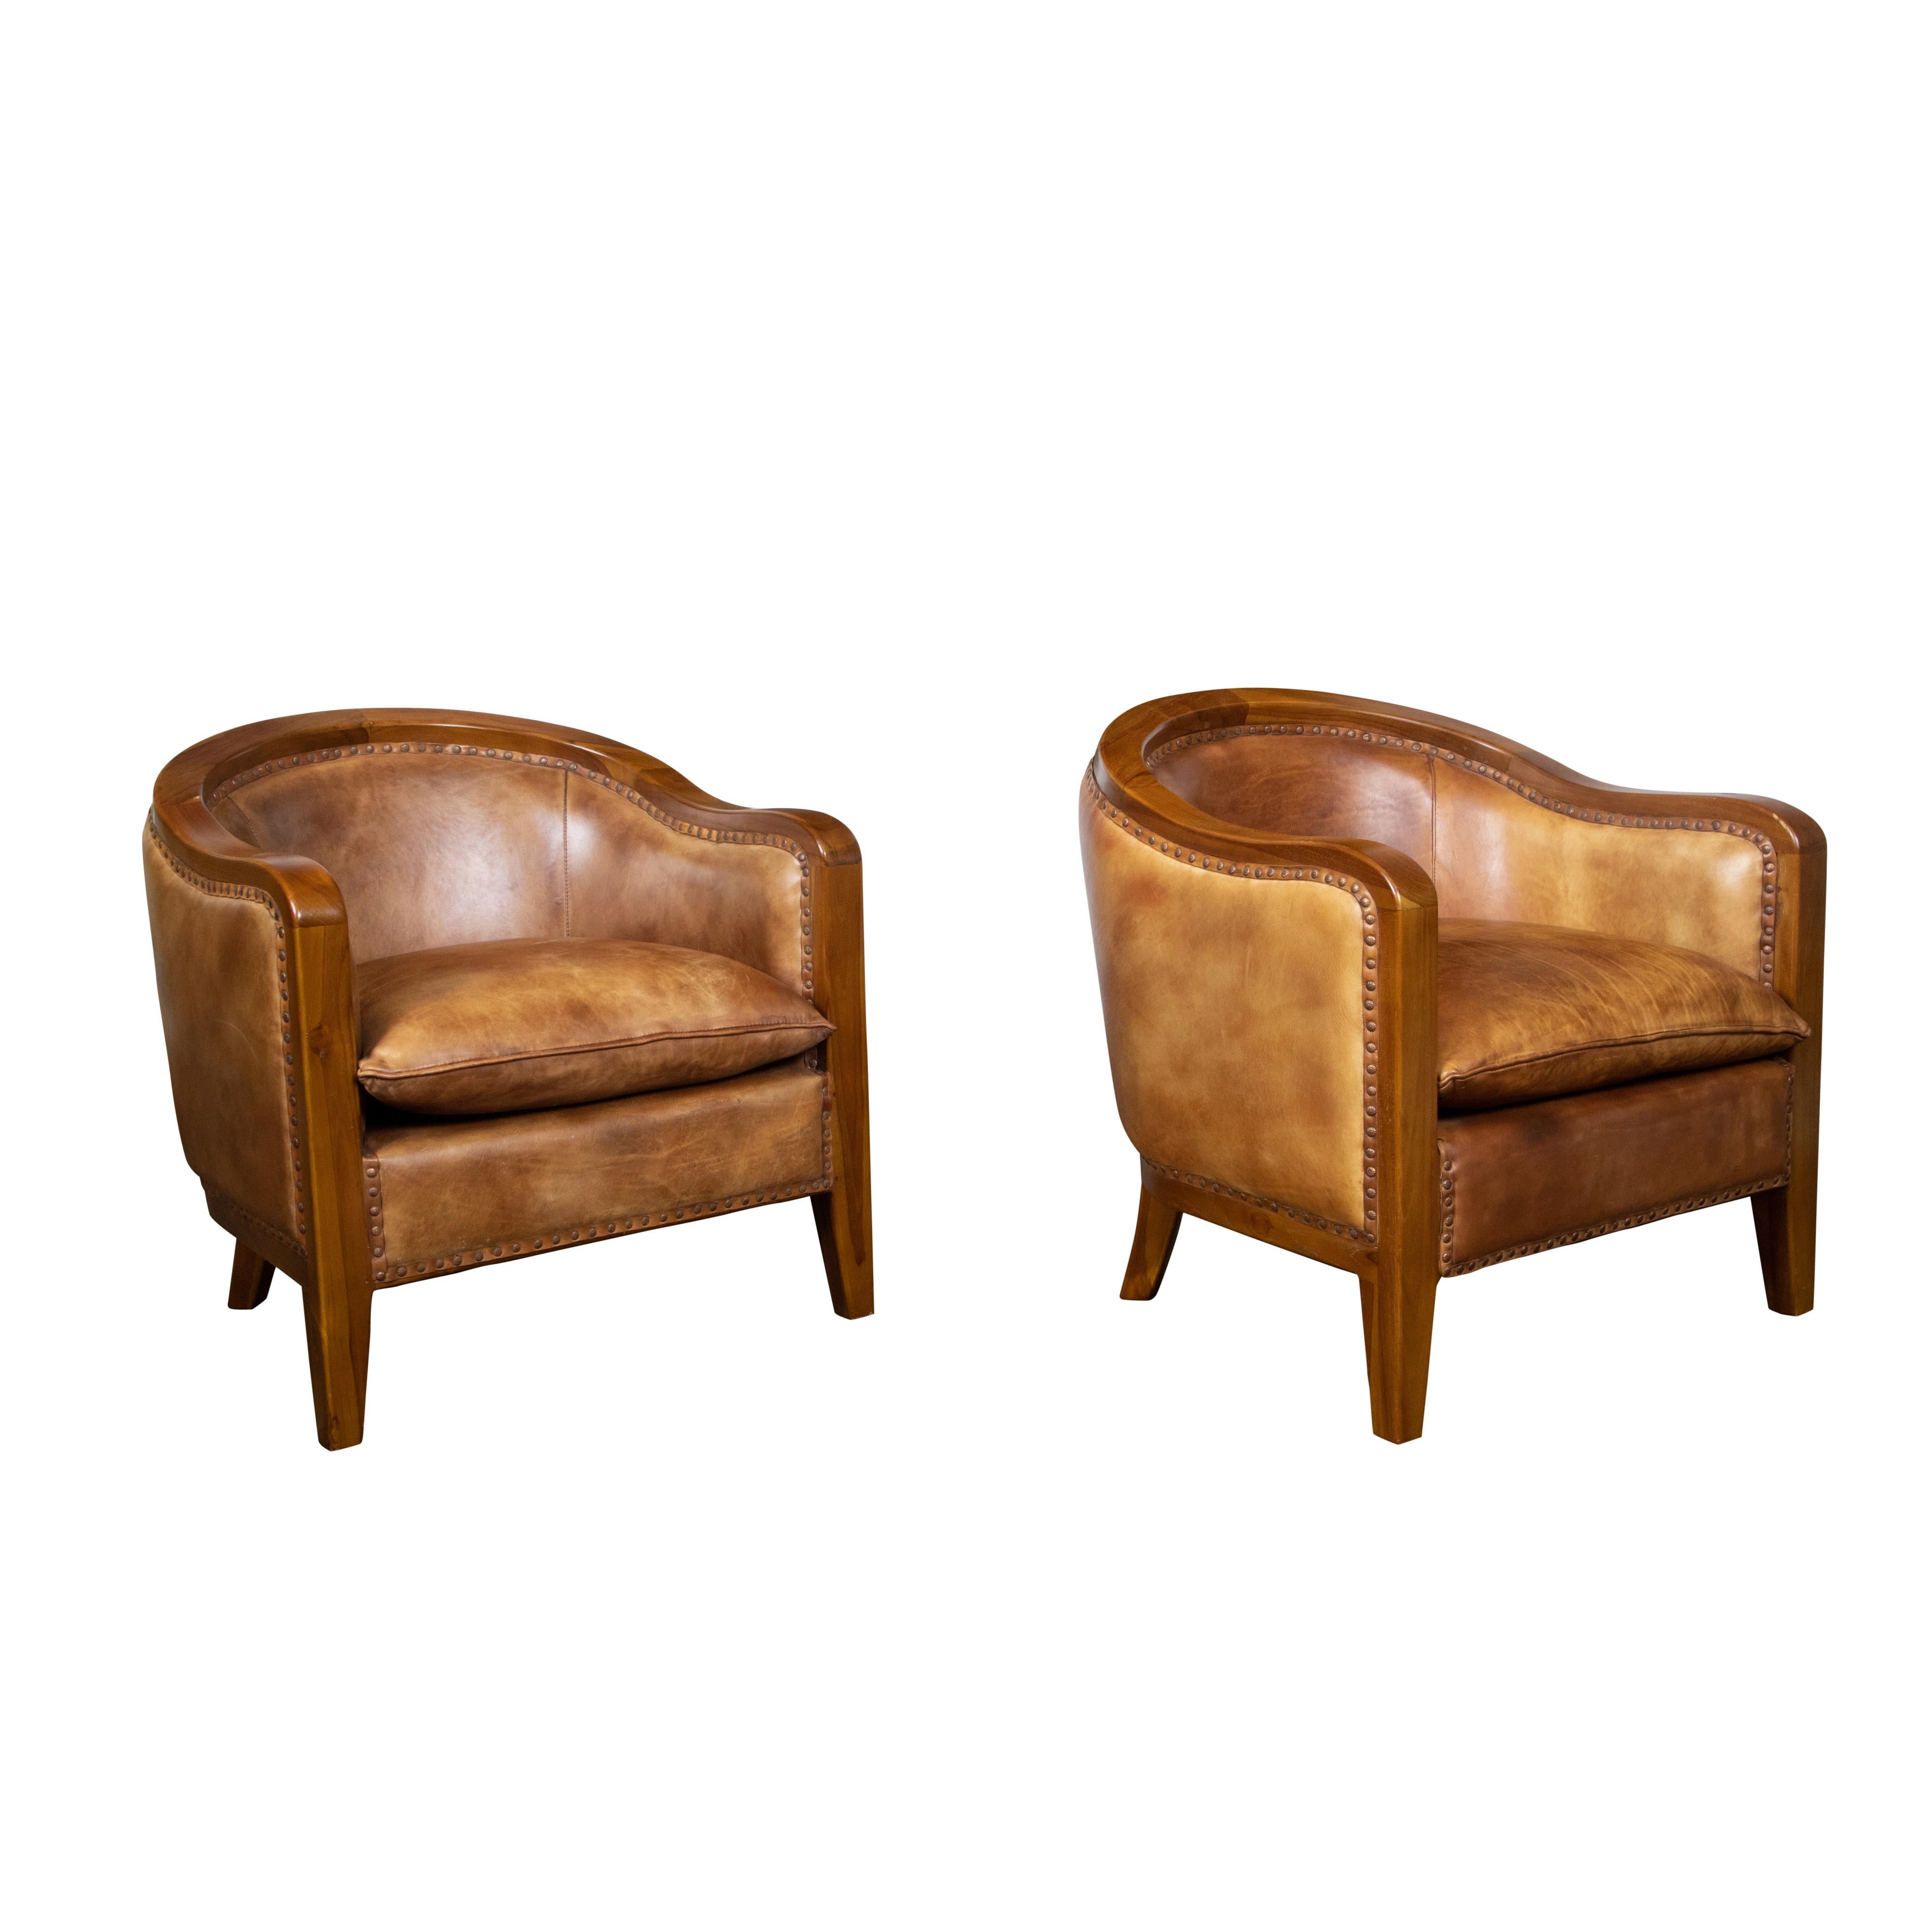 A pair of French vintage wood and brown leather horseshoe club chairs from the mid 20th century, with ornate nailhead trim and tapered legs. Created in France during the Midcentury period, this pair of club chairs charms us with its simple yet